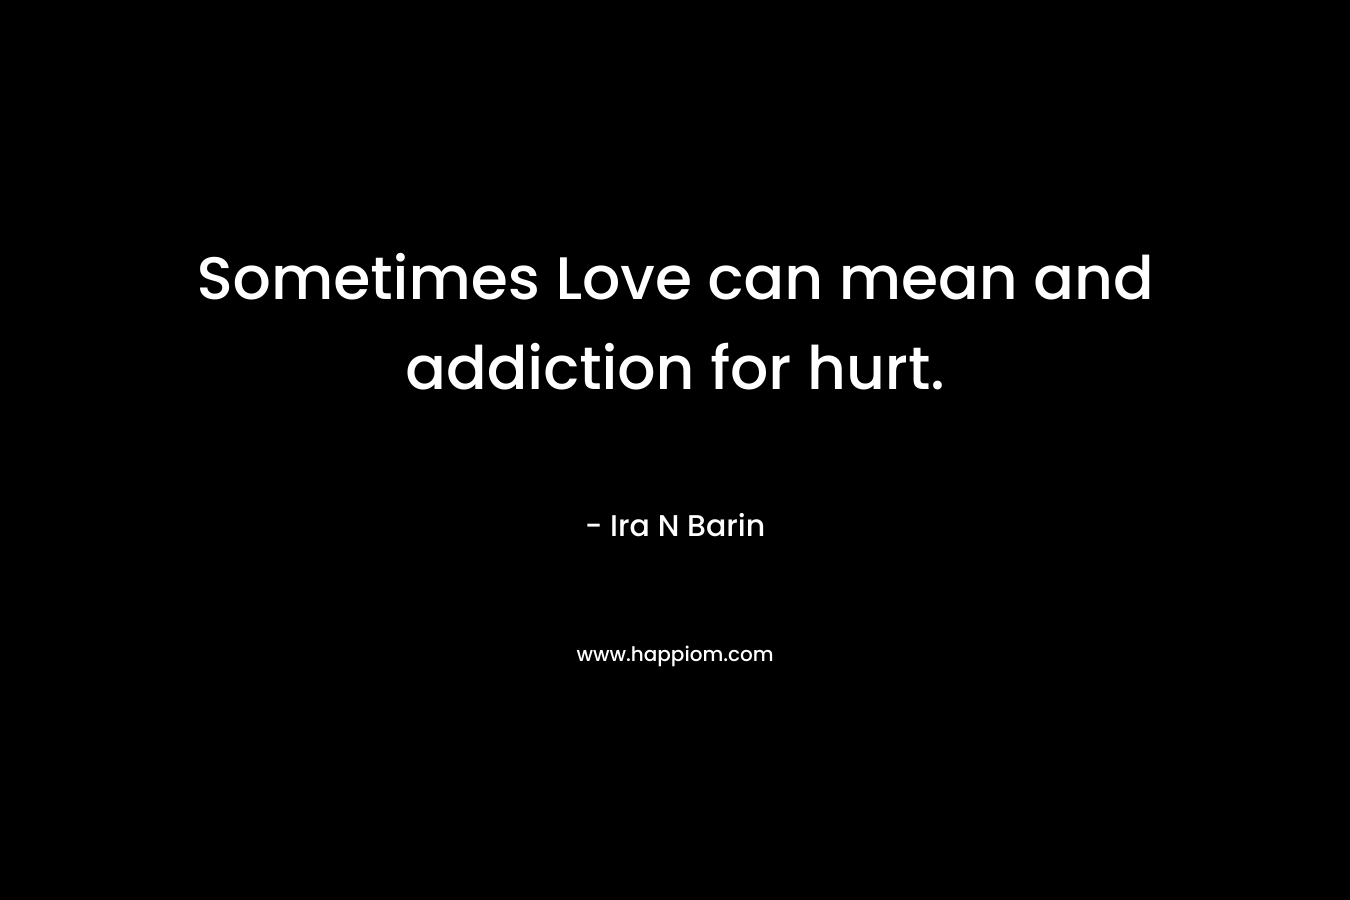 Sometimes Love can mean and addiction for hurt. – Ira N Barin